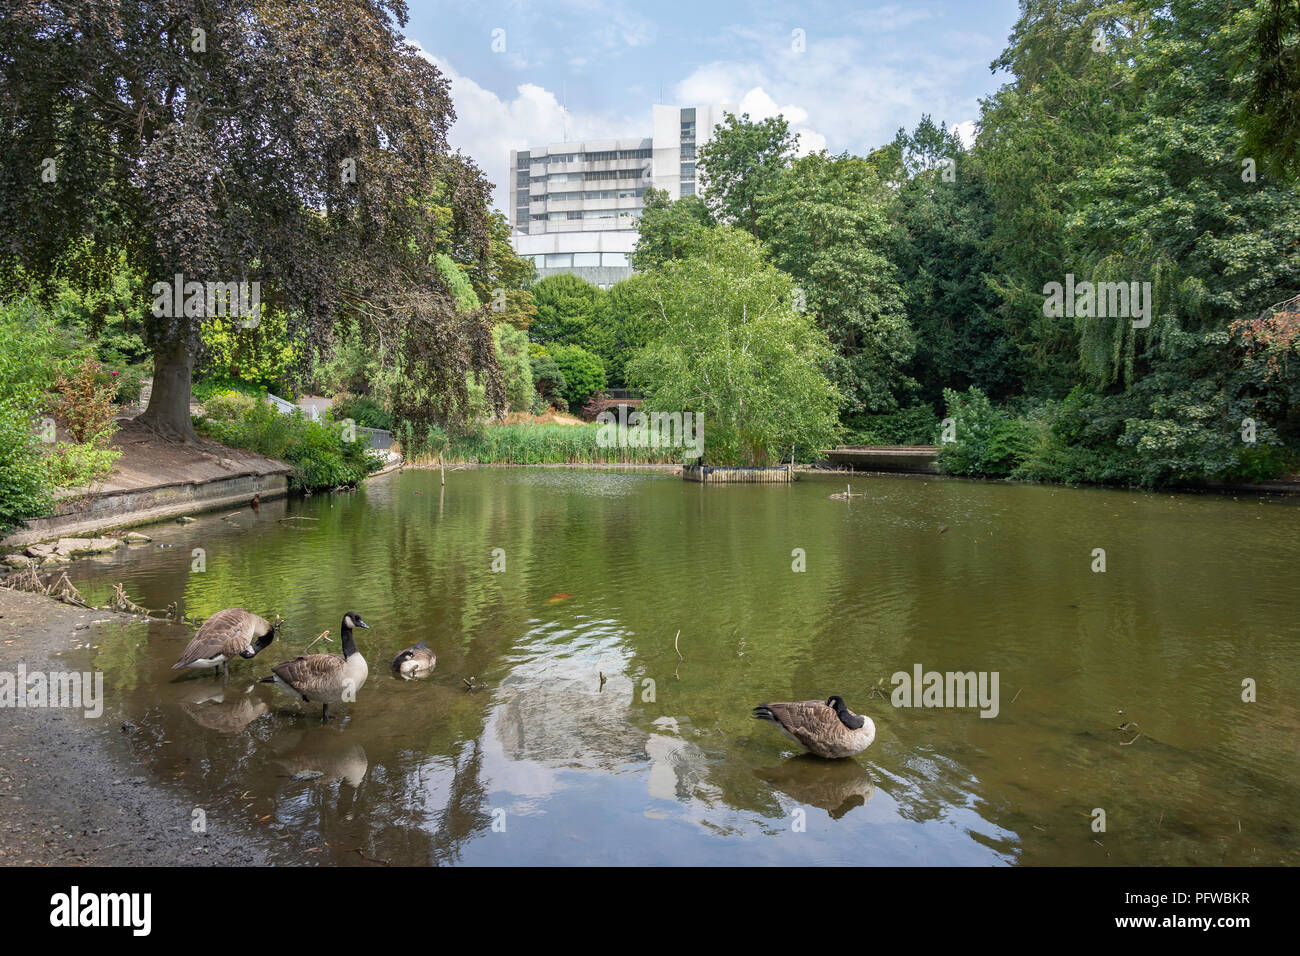 View of lake, Church House Gardens, Bromley, The London Borough of Bromley, Greater London, England, United Kingdom Stock Photo